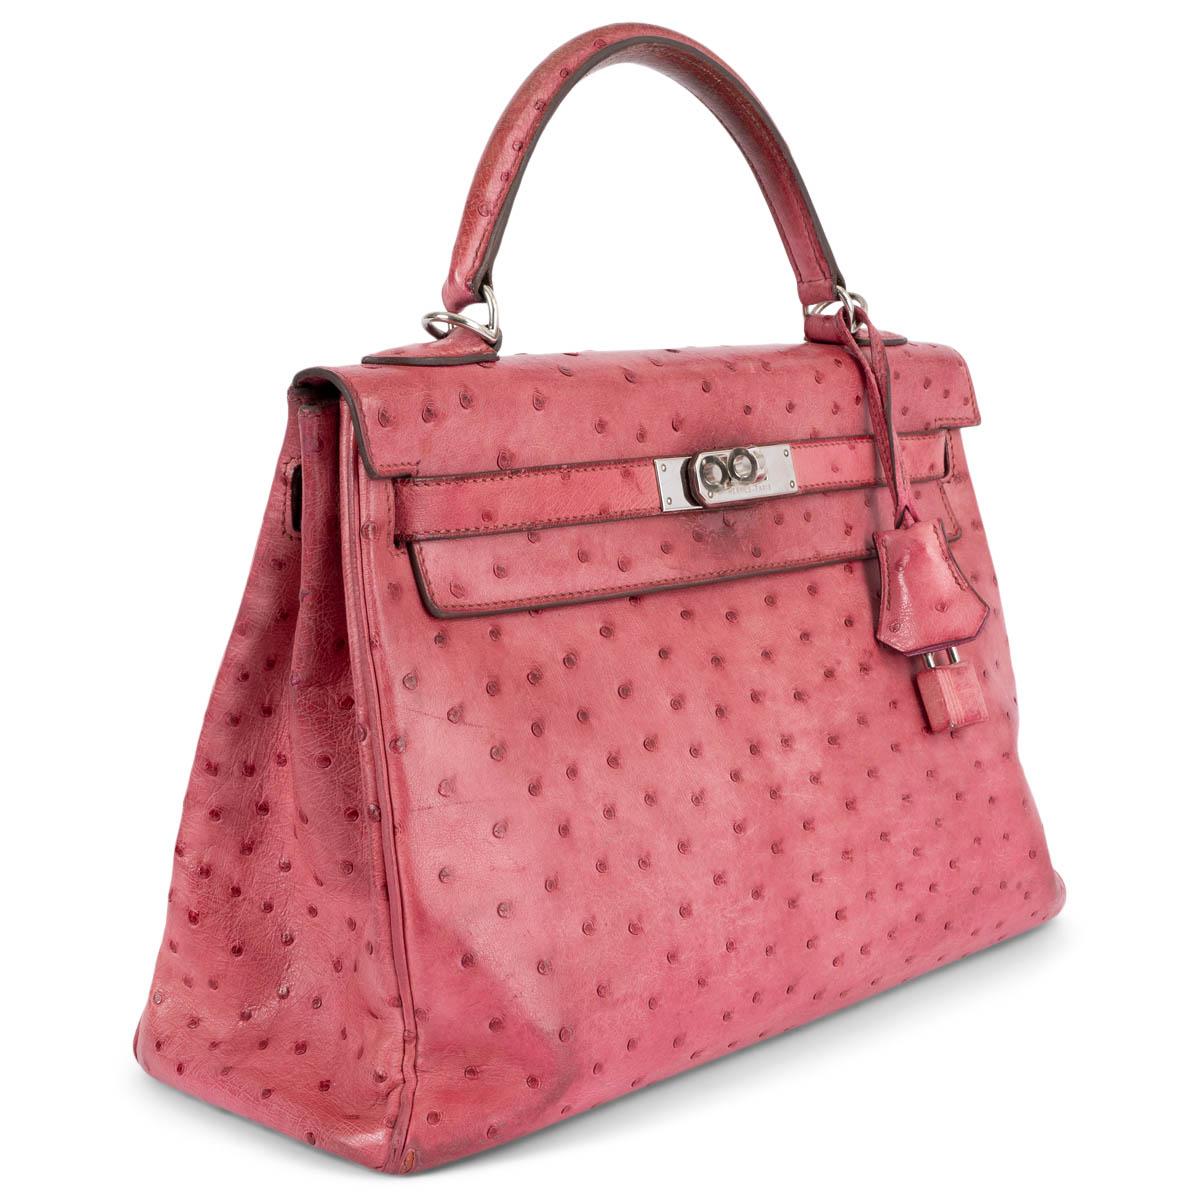 100% authentic Hermès Kelly 32 Retourne bag in fuchsia pink Ostrich leather with palladium hardware. Lined in fuchsia goat skin leather with two open pockets against the front and a zipper pocket against the back. Has been carried often and shows